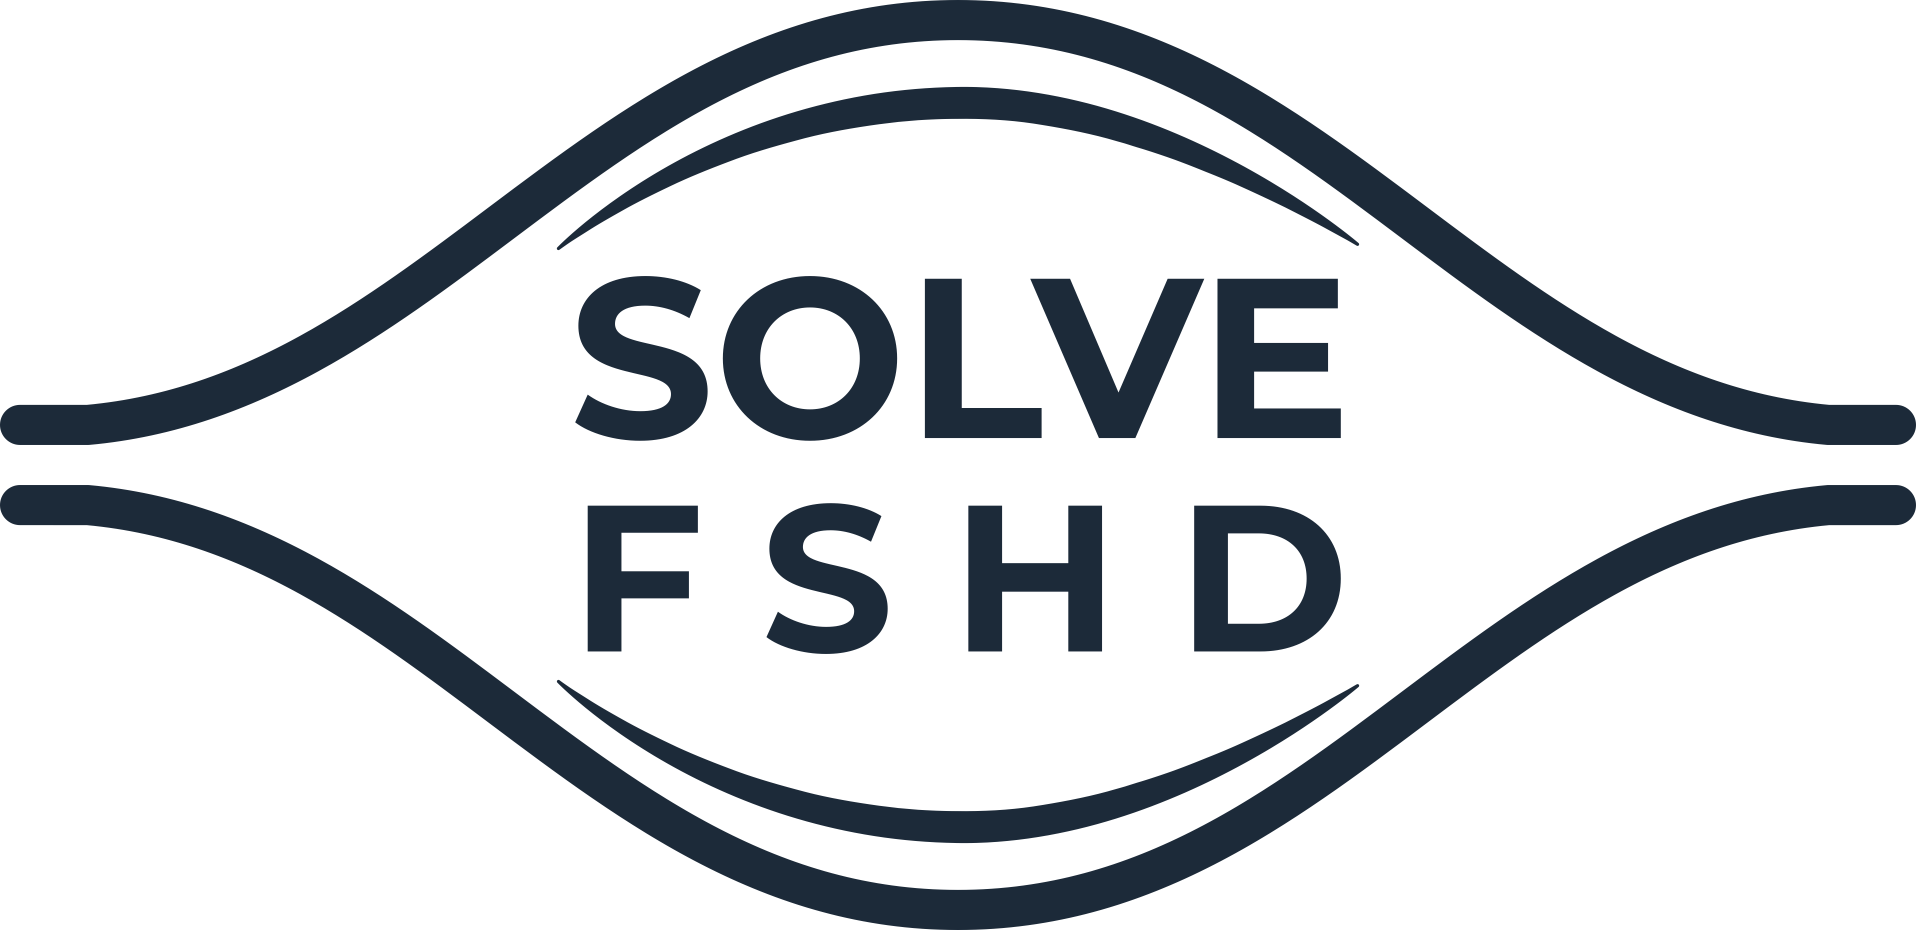 SOLVE FSHD Announces New Collaborative Research Grants to Accelerate Novel Potential Therapeutics for Facioscapulohumeral Muscular Dystrophy (FSHD)